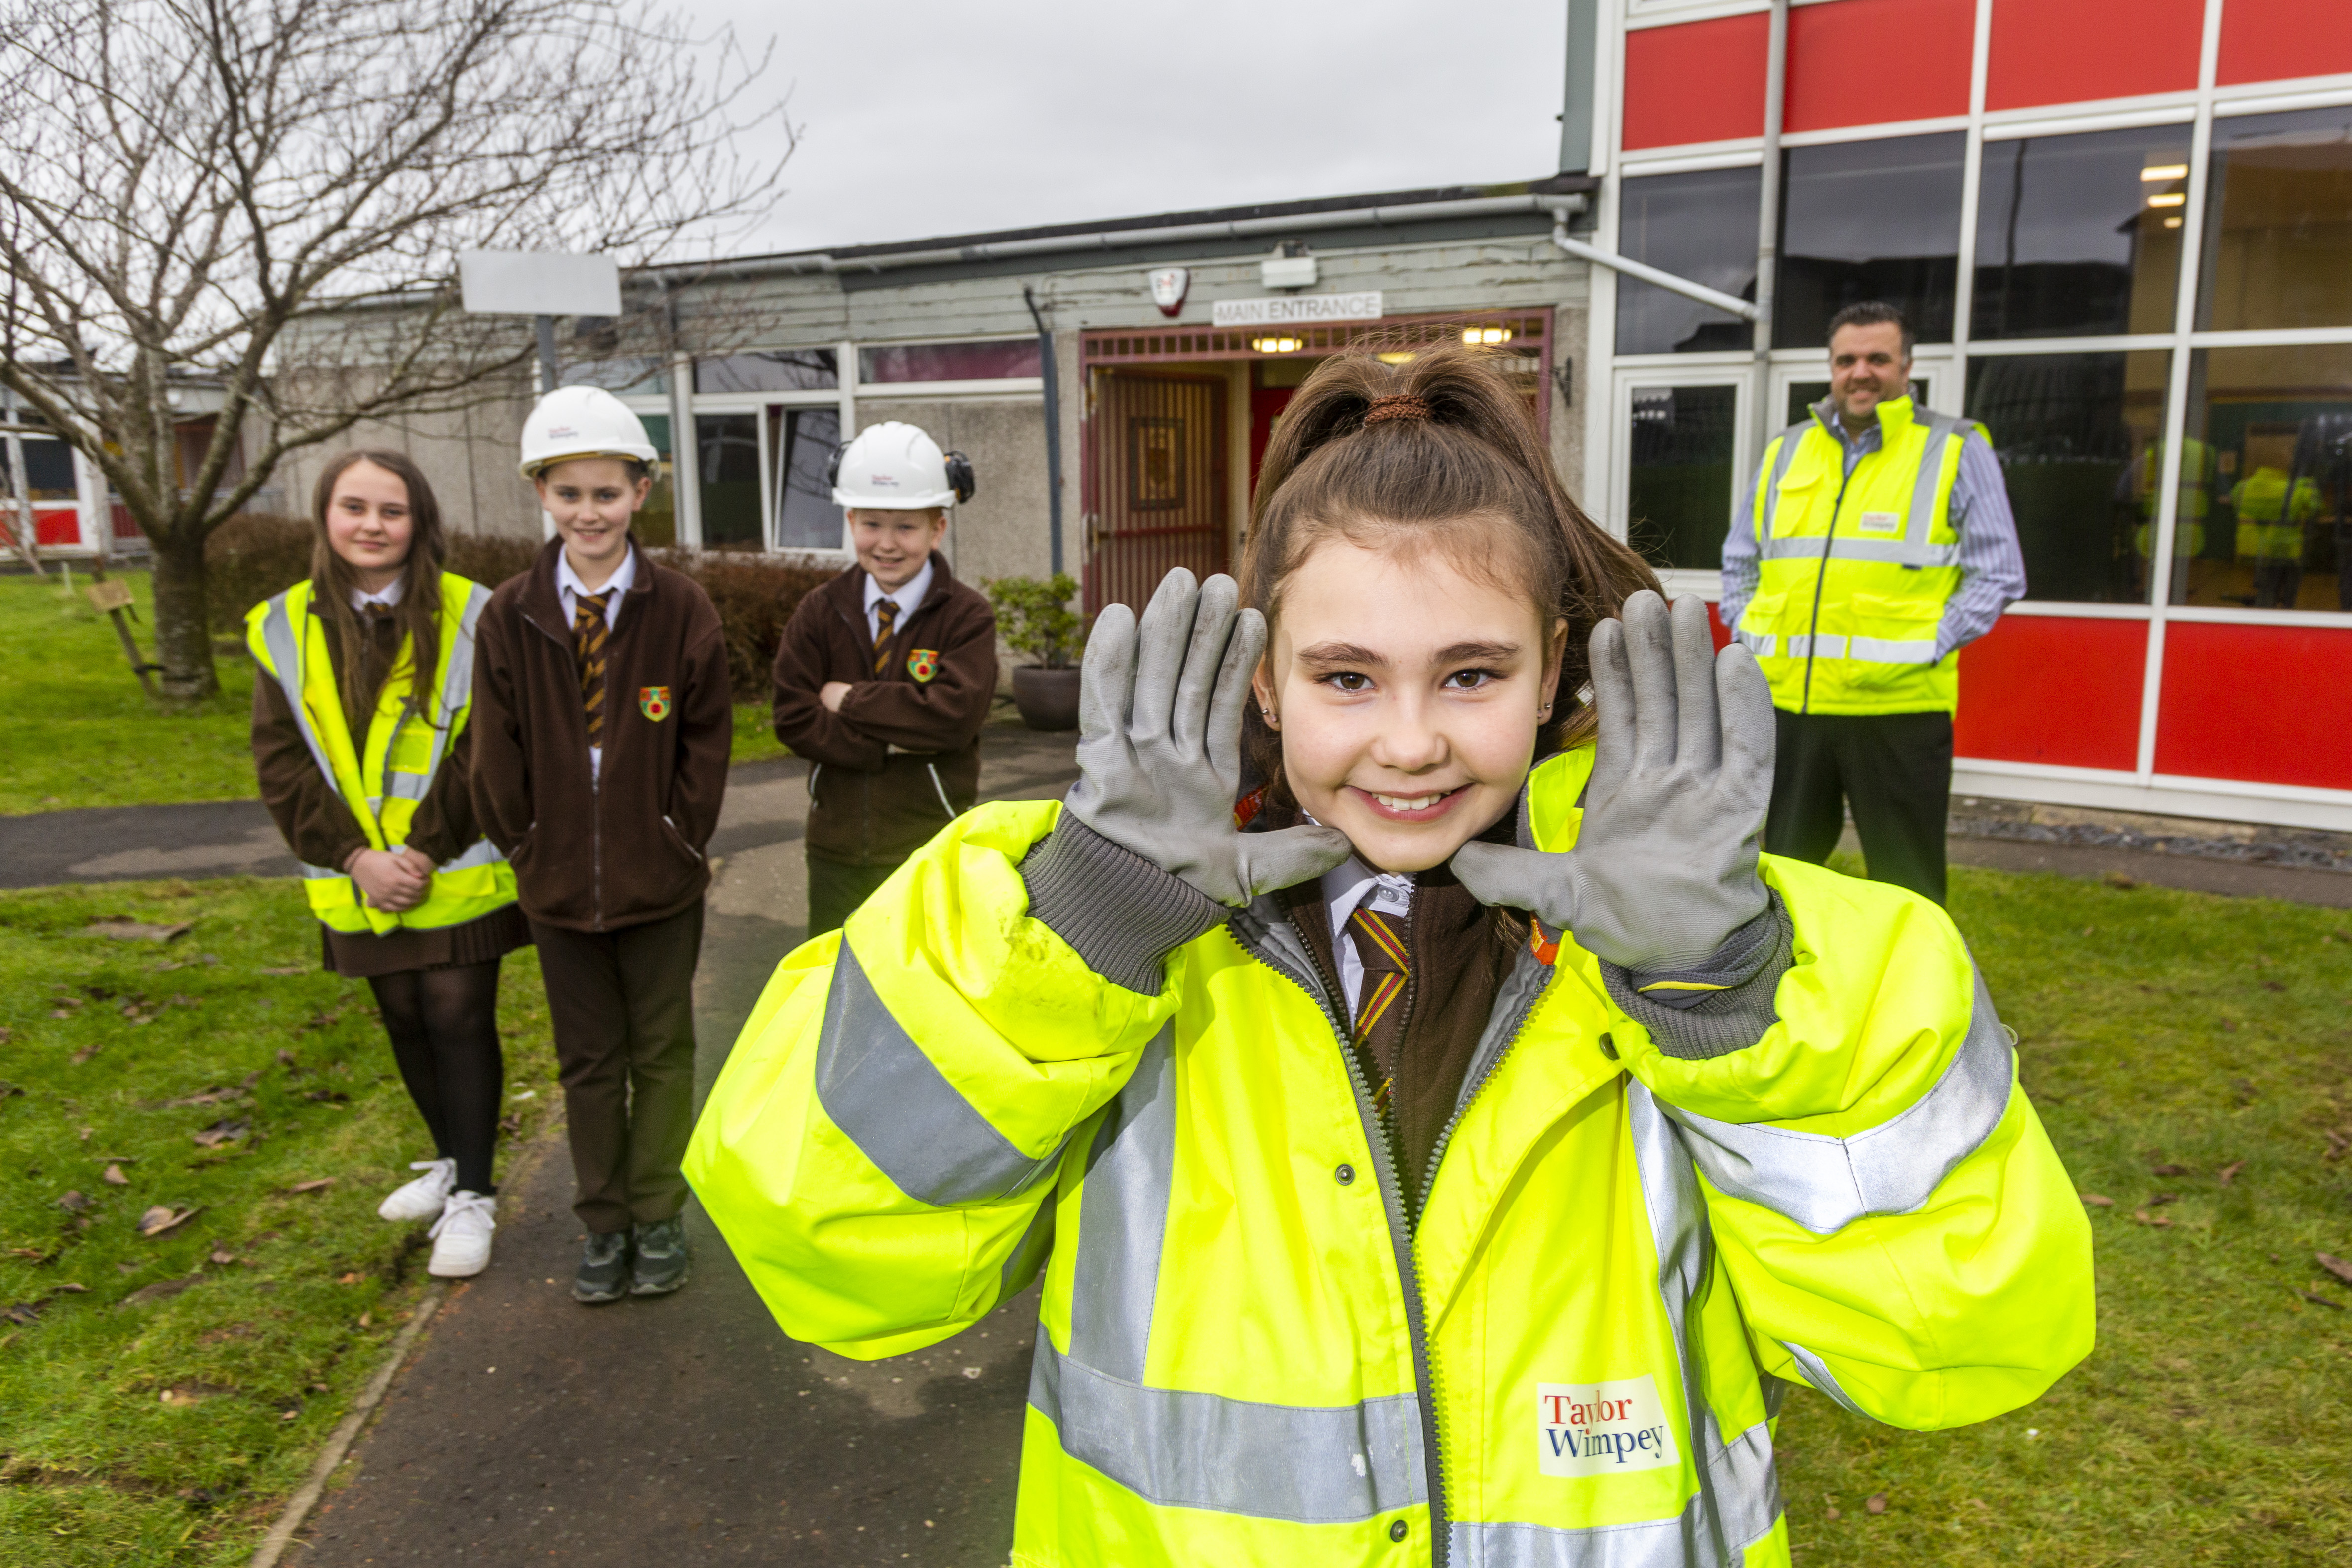 Taylor Wimpey gives lesson in safety to local school children in Moodiesburn